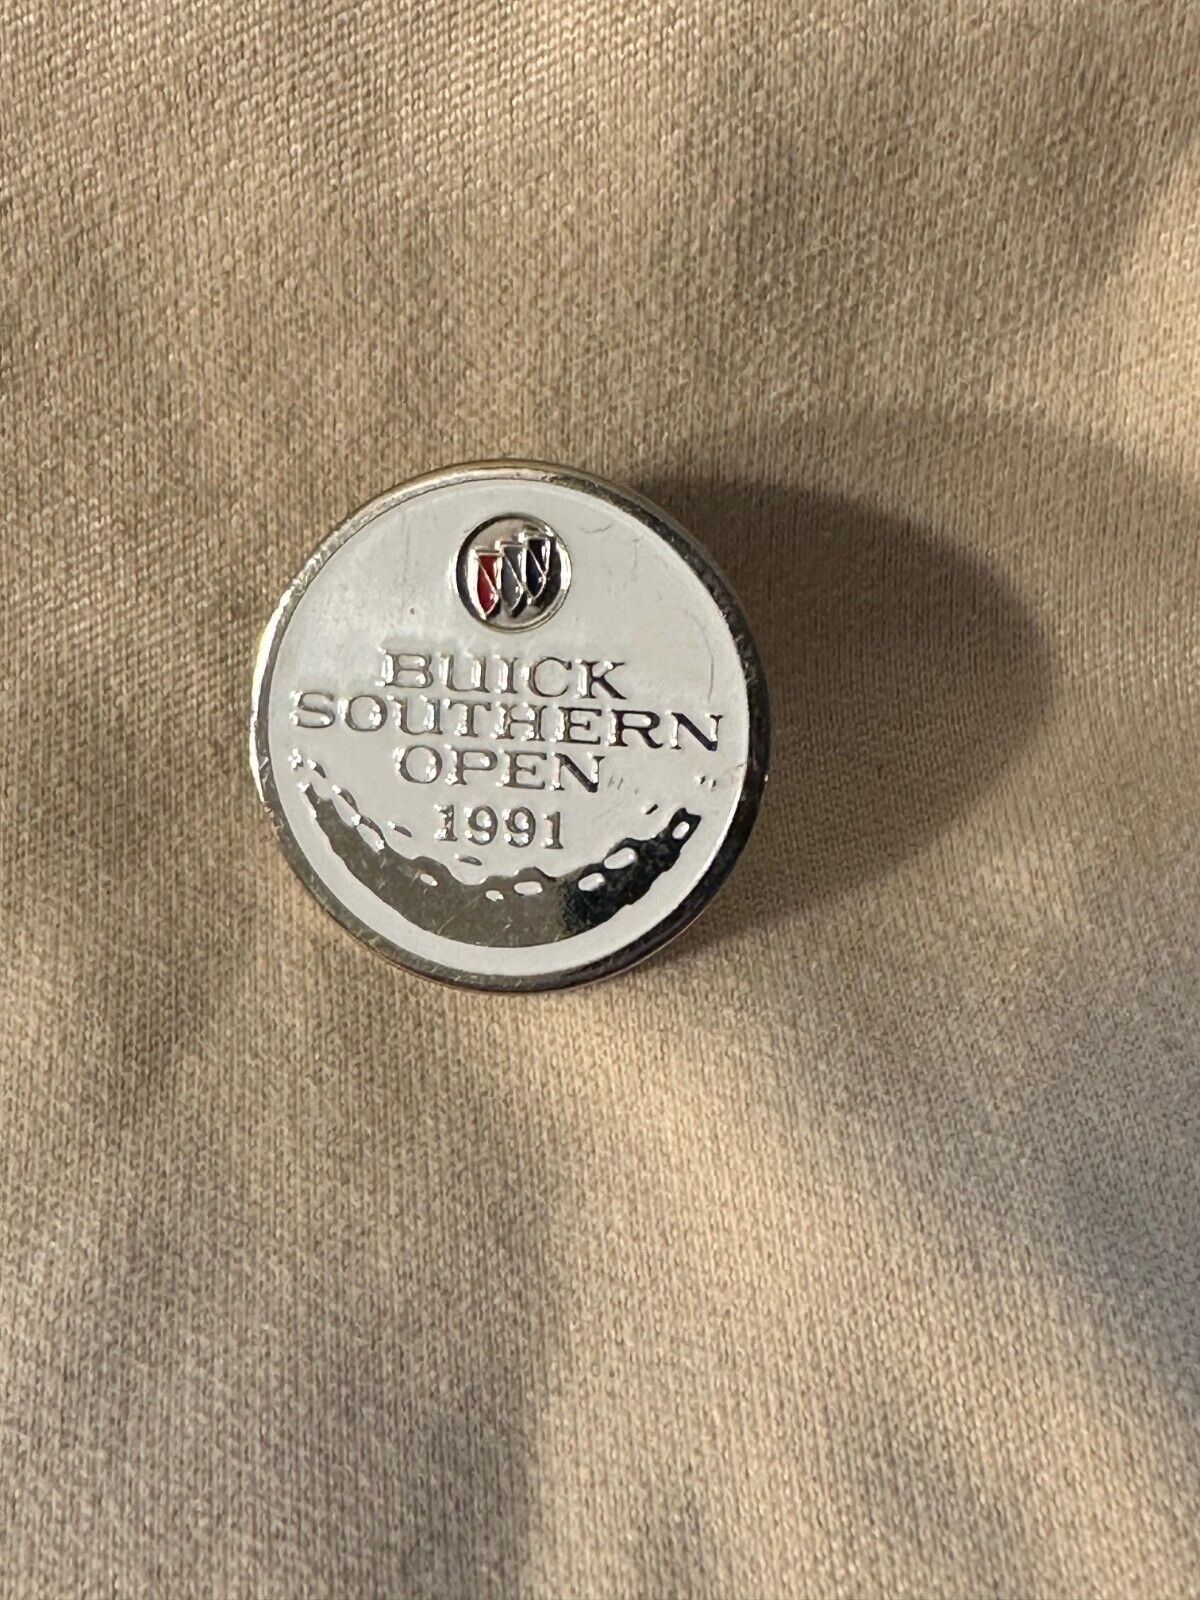 Vintage Buick Southern Open 1991  Tie Tack Lapel Pin